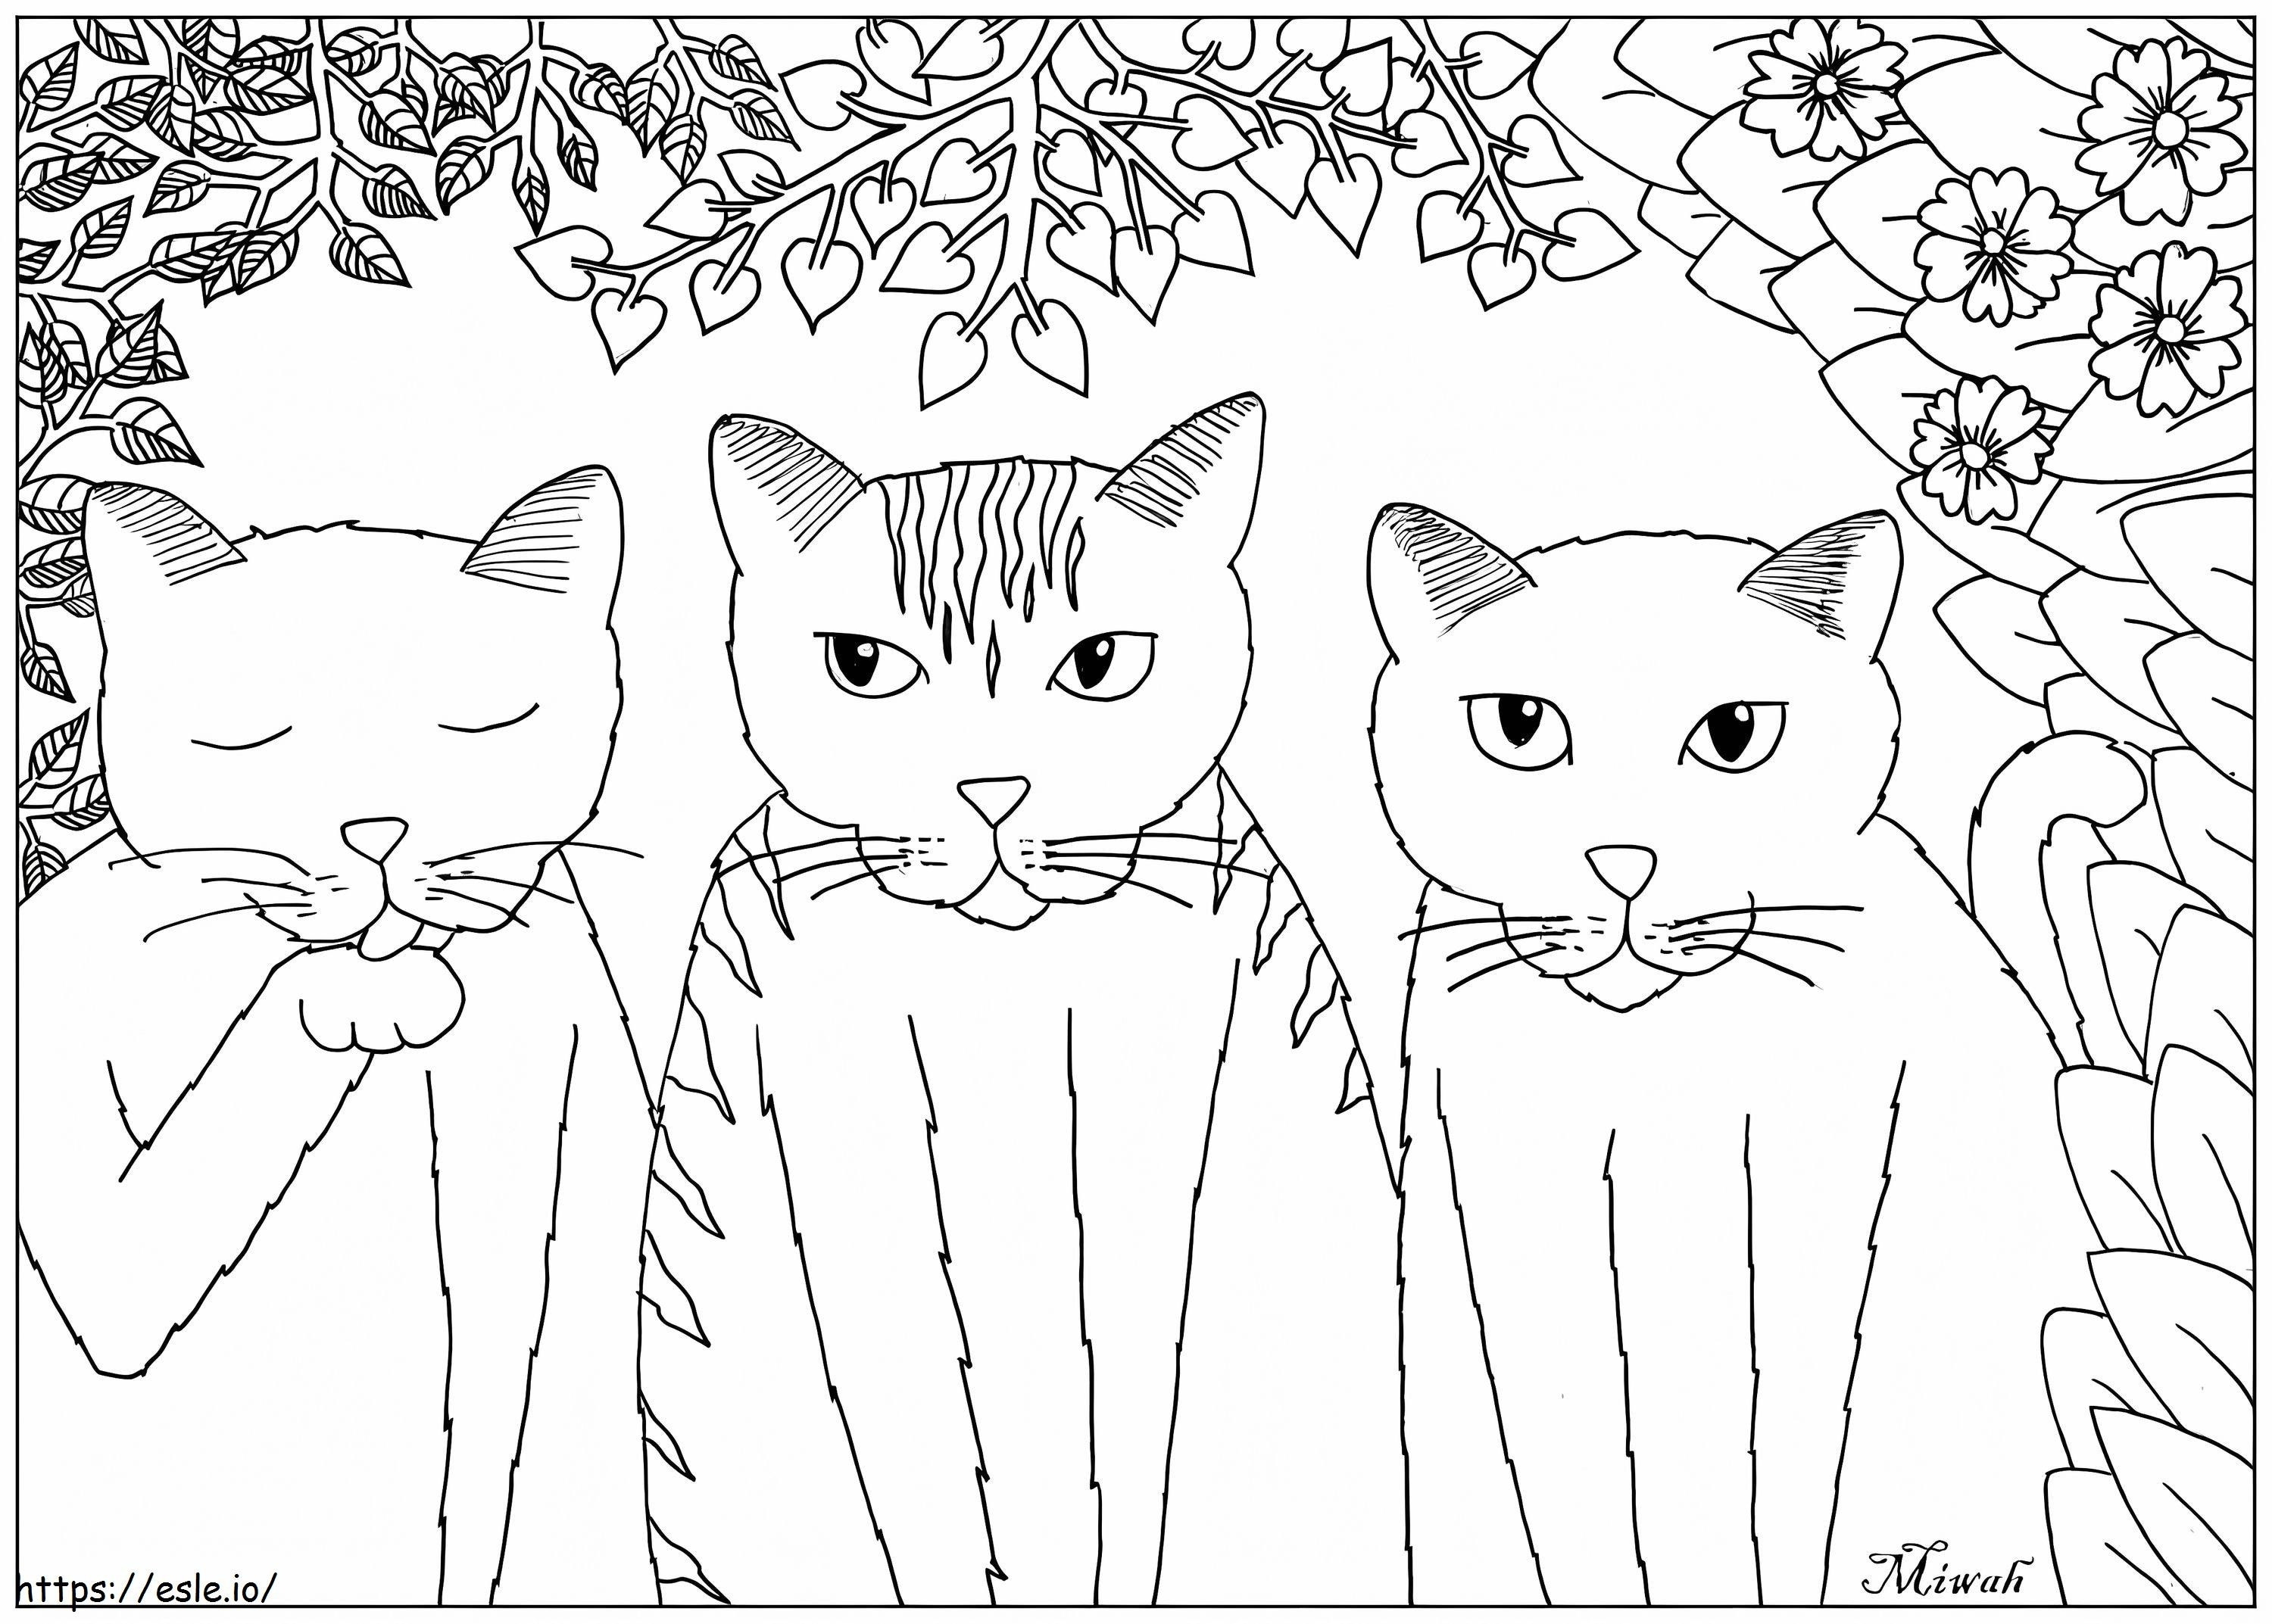 Three Cats coloring page